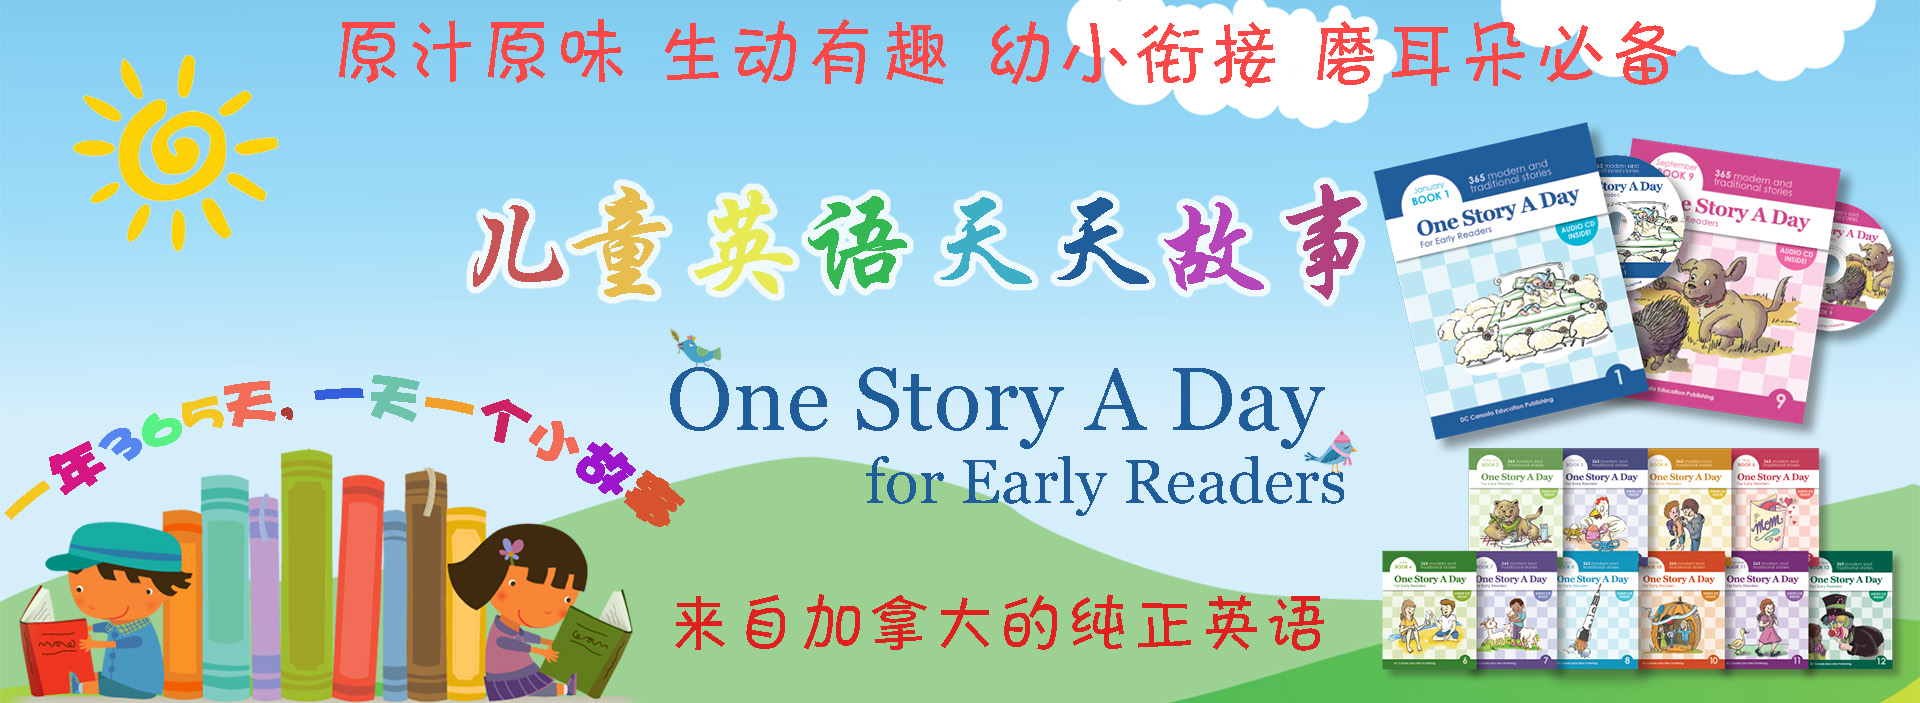 One story A Day for Early Readers banner